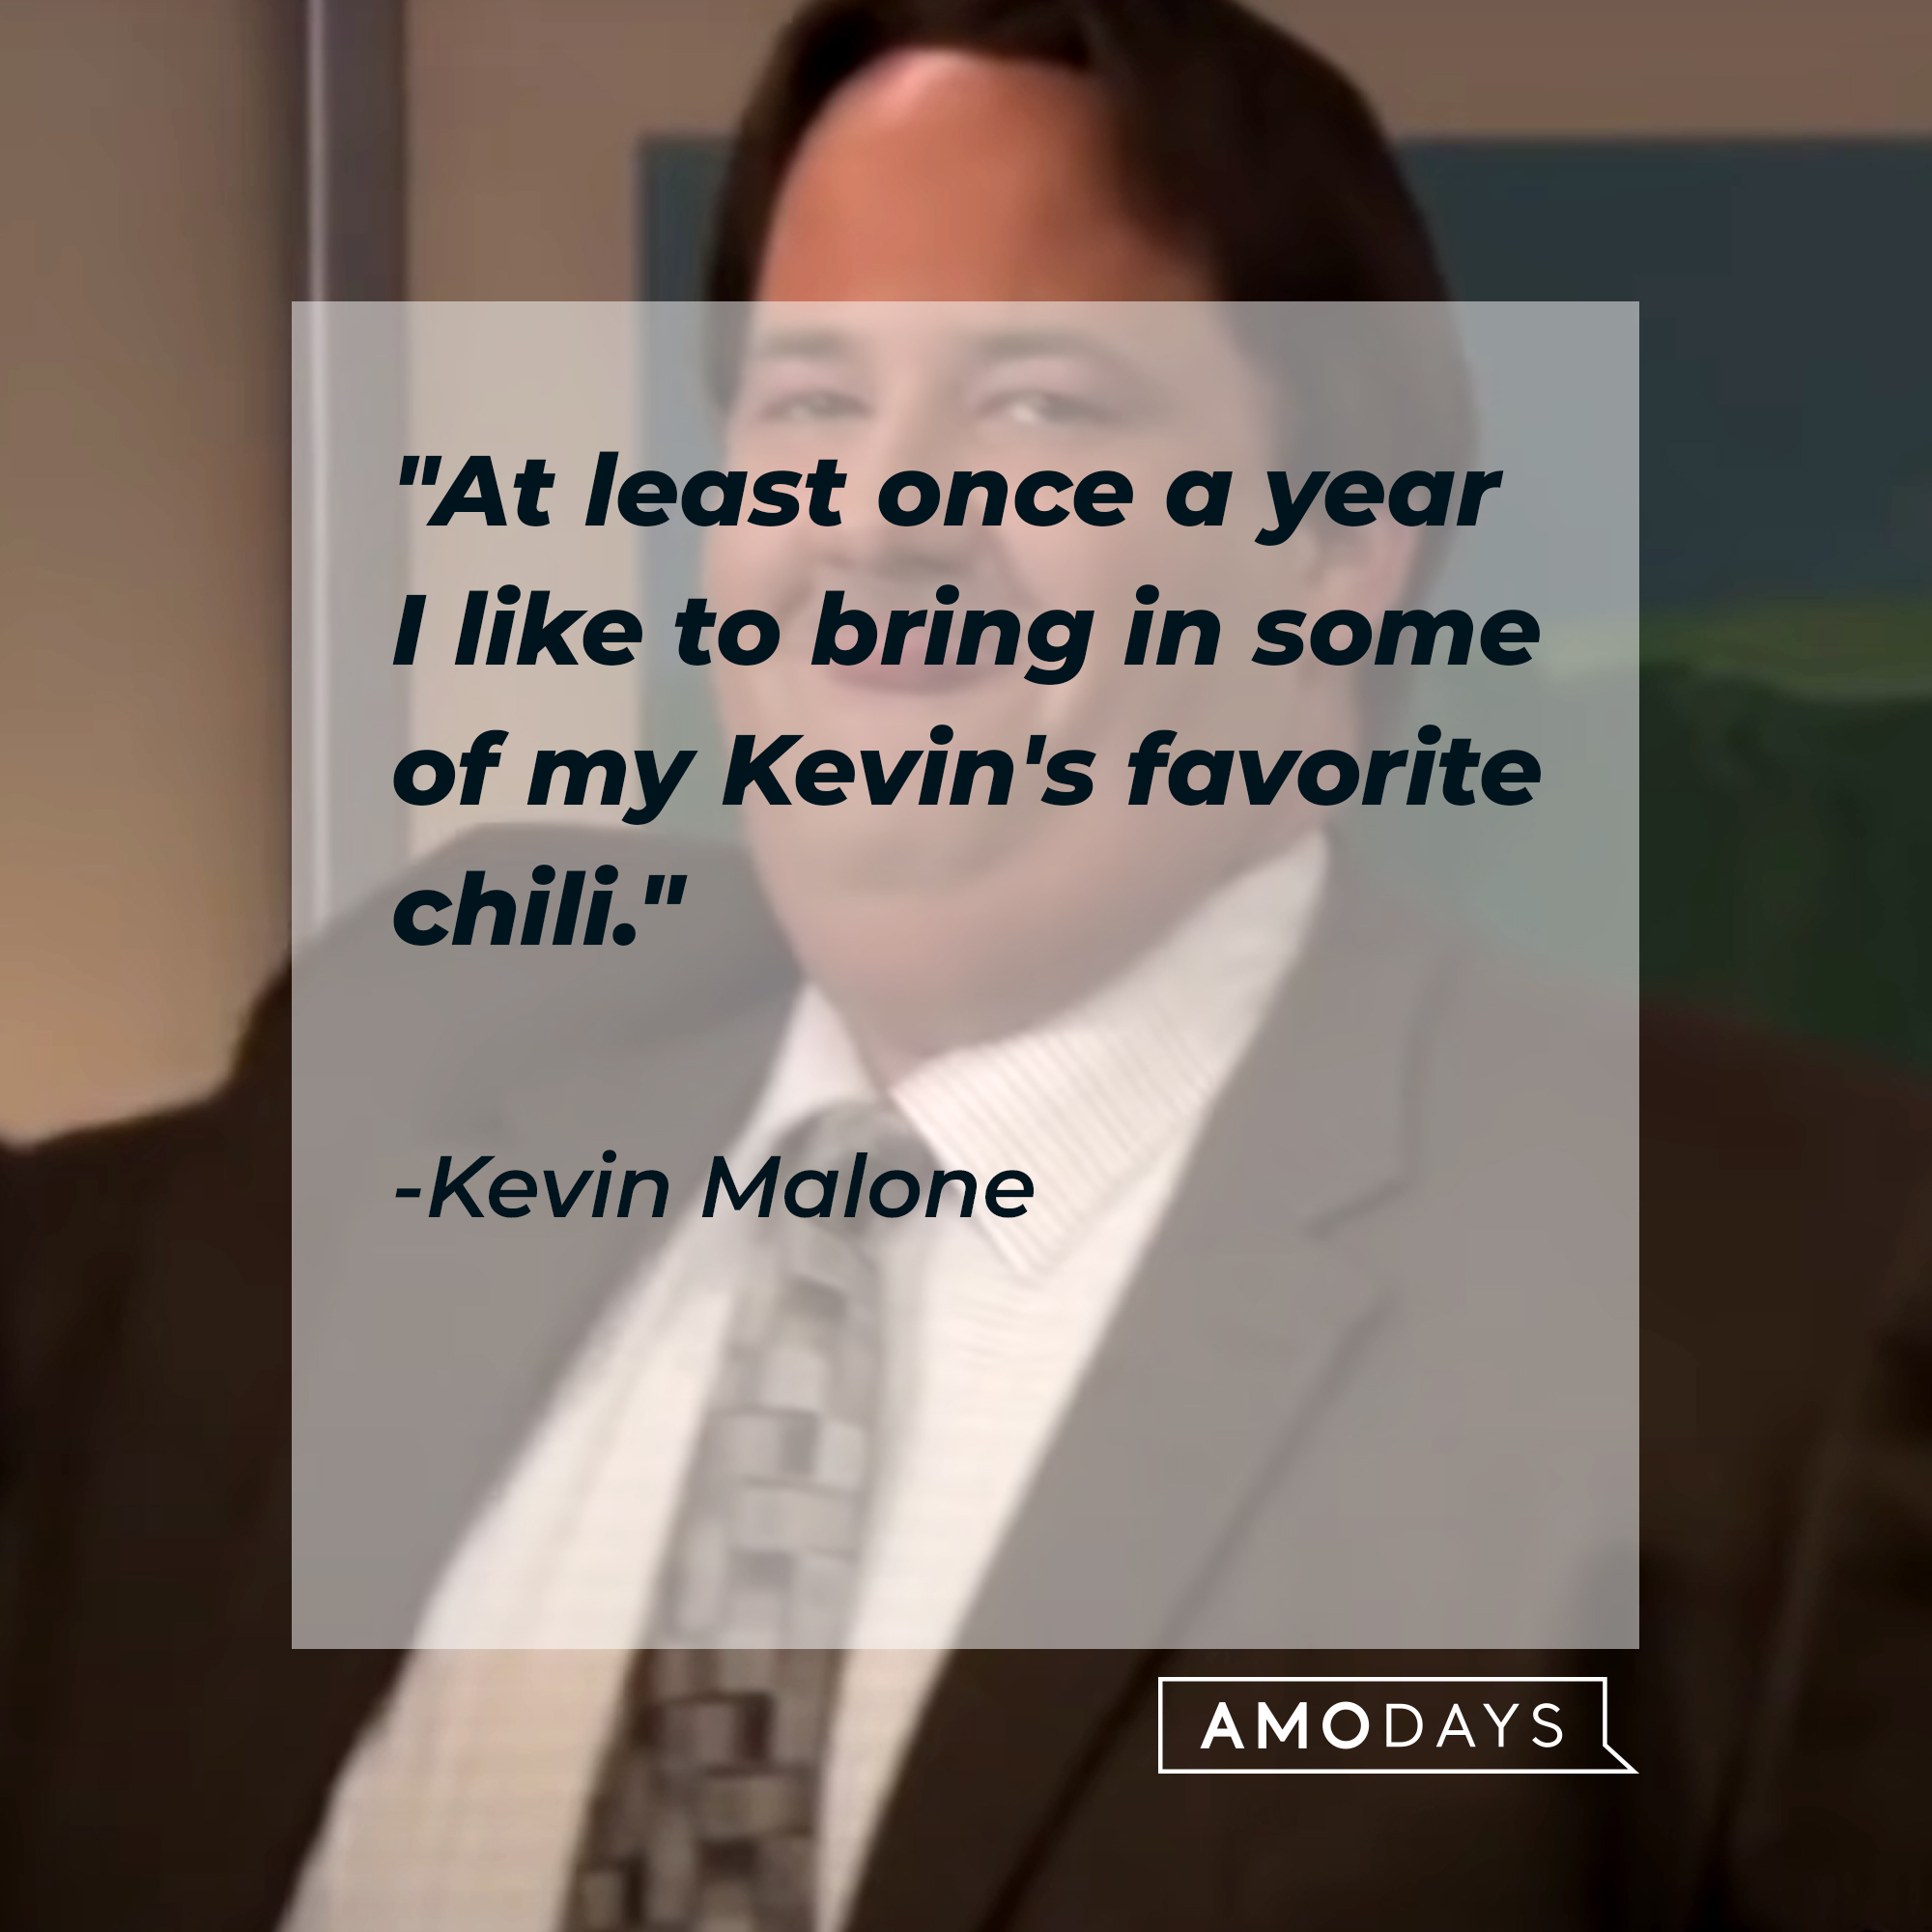 Kevin Malone's quote: "At least once a year I like to bring in some of my Kevin's favorite chili." | Source: youtube.com/TheOffice